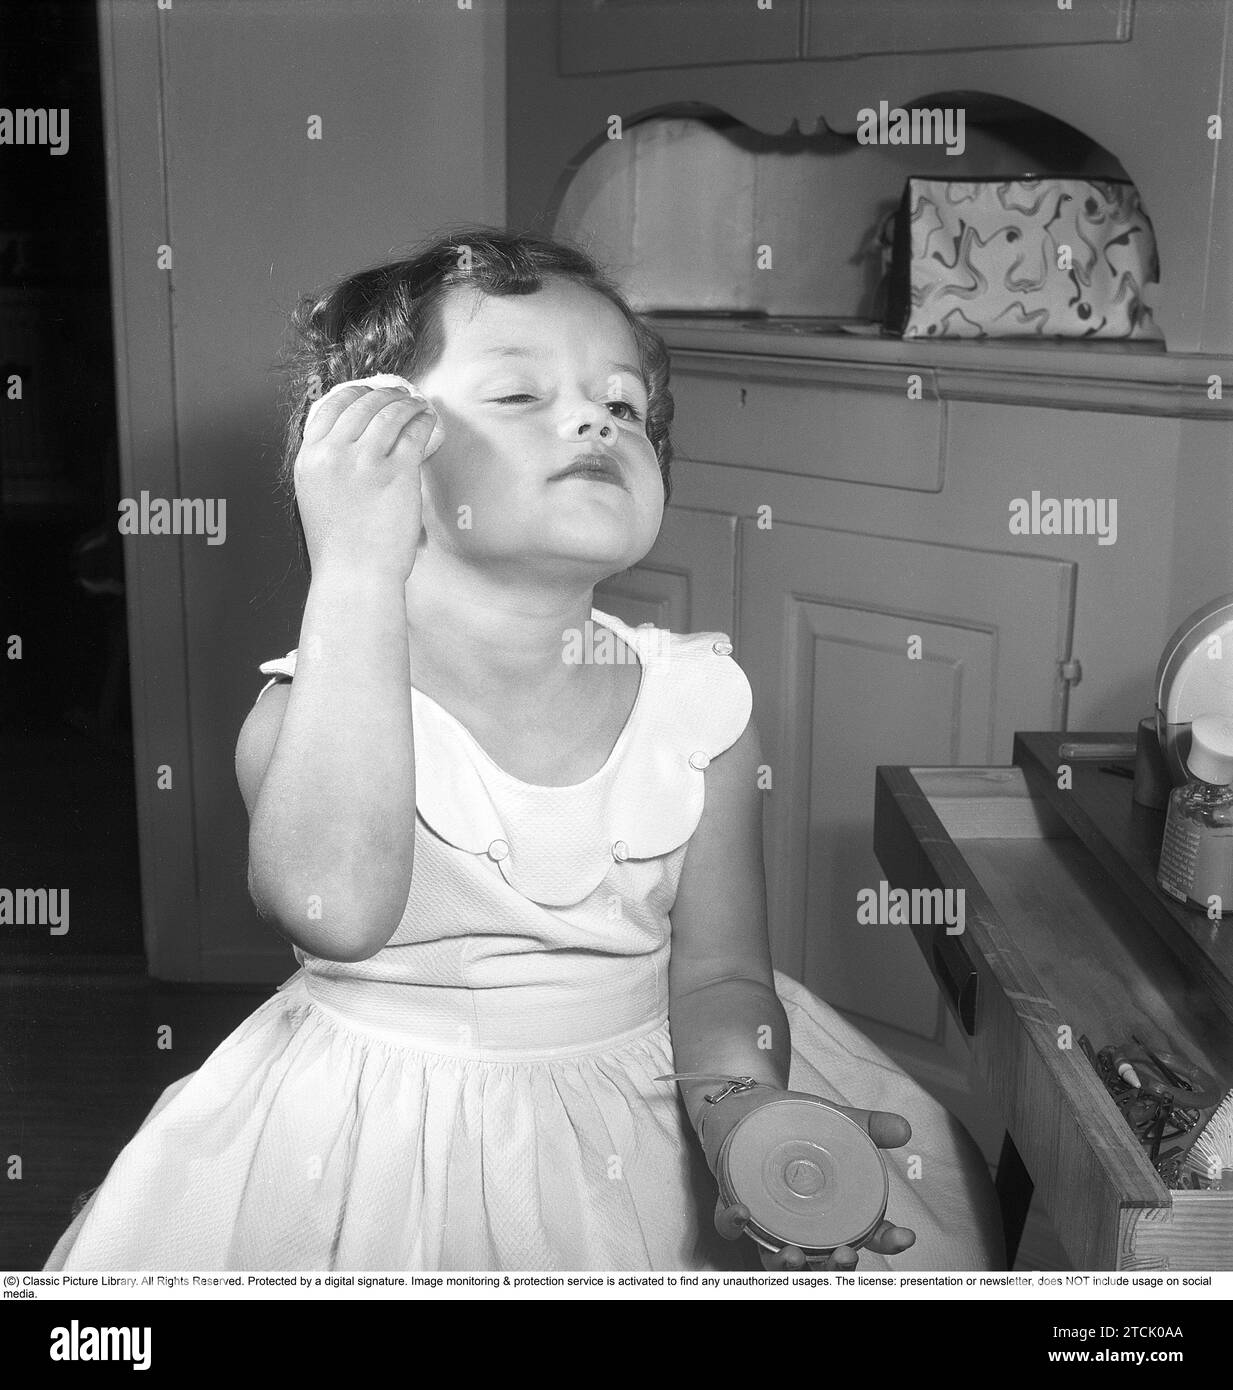 In the 1950s. A little girl is putting on makeup, using a powder on her face. 1956. Kristoffersson ref BS96-11 Stock Photo